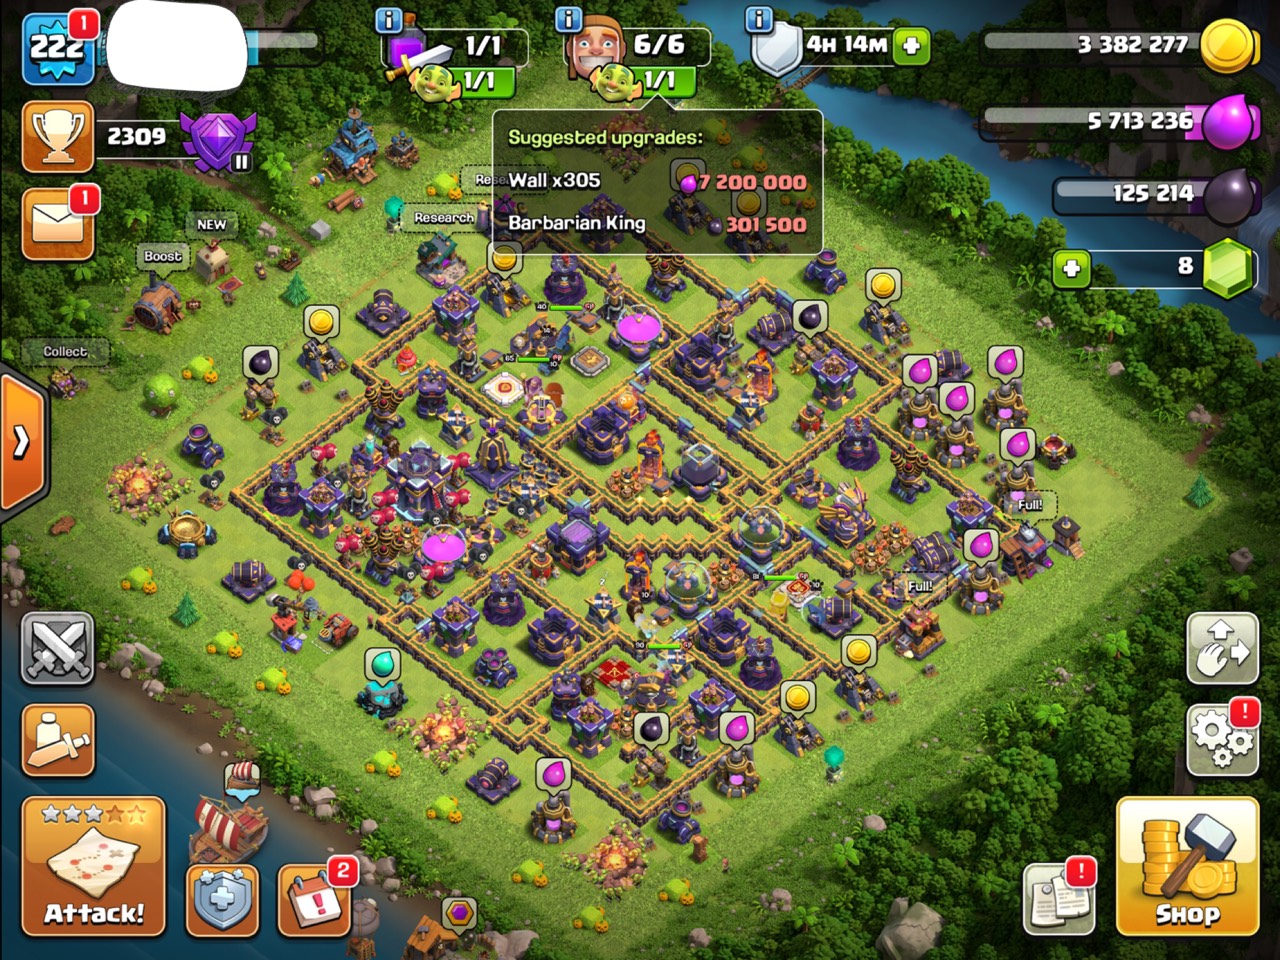 QQ5155 : TH15 - Heroes 81_90_65_40 ( Almost Max Defense + Troops ) - Level 222 - Fast Delivery ( Android & iOS )